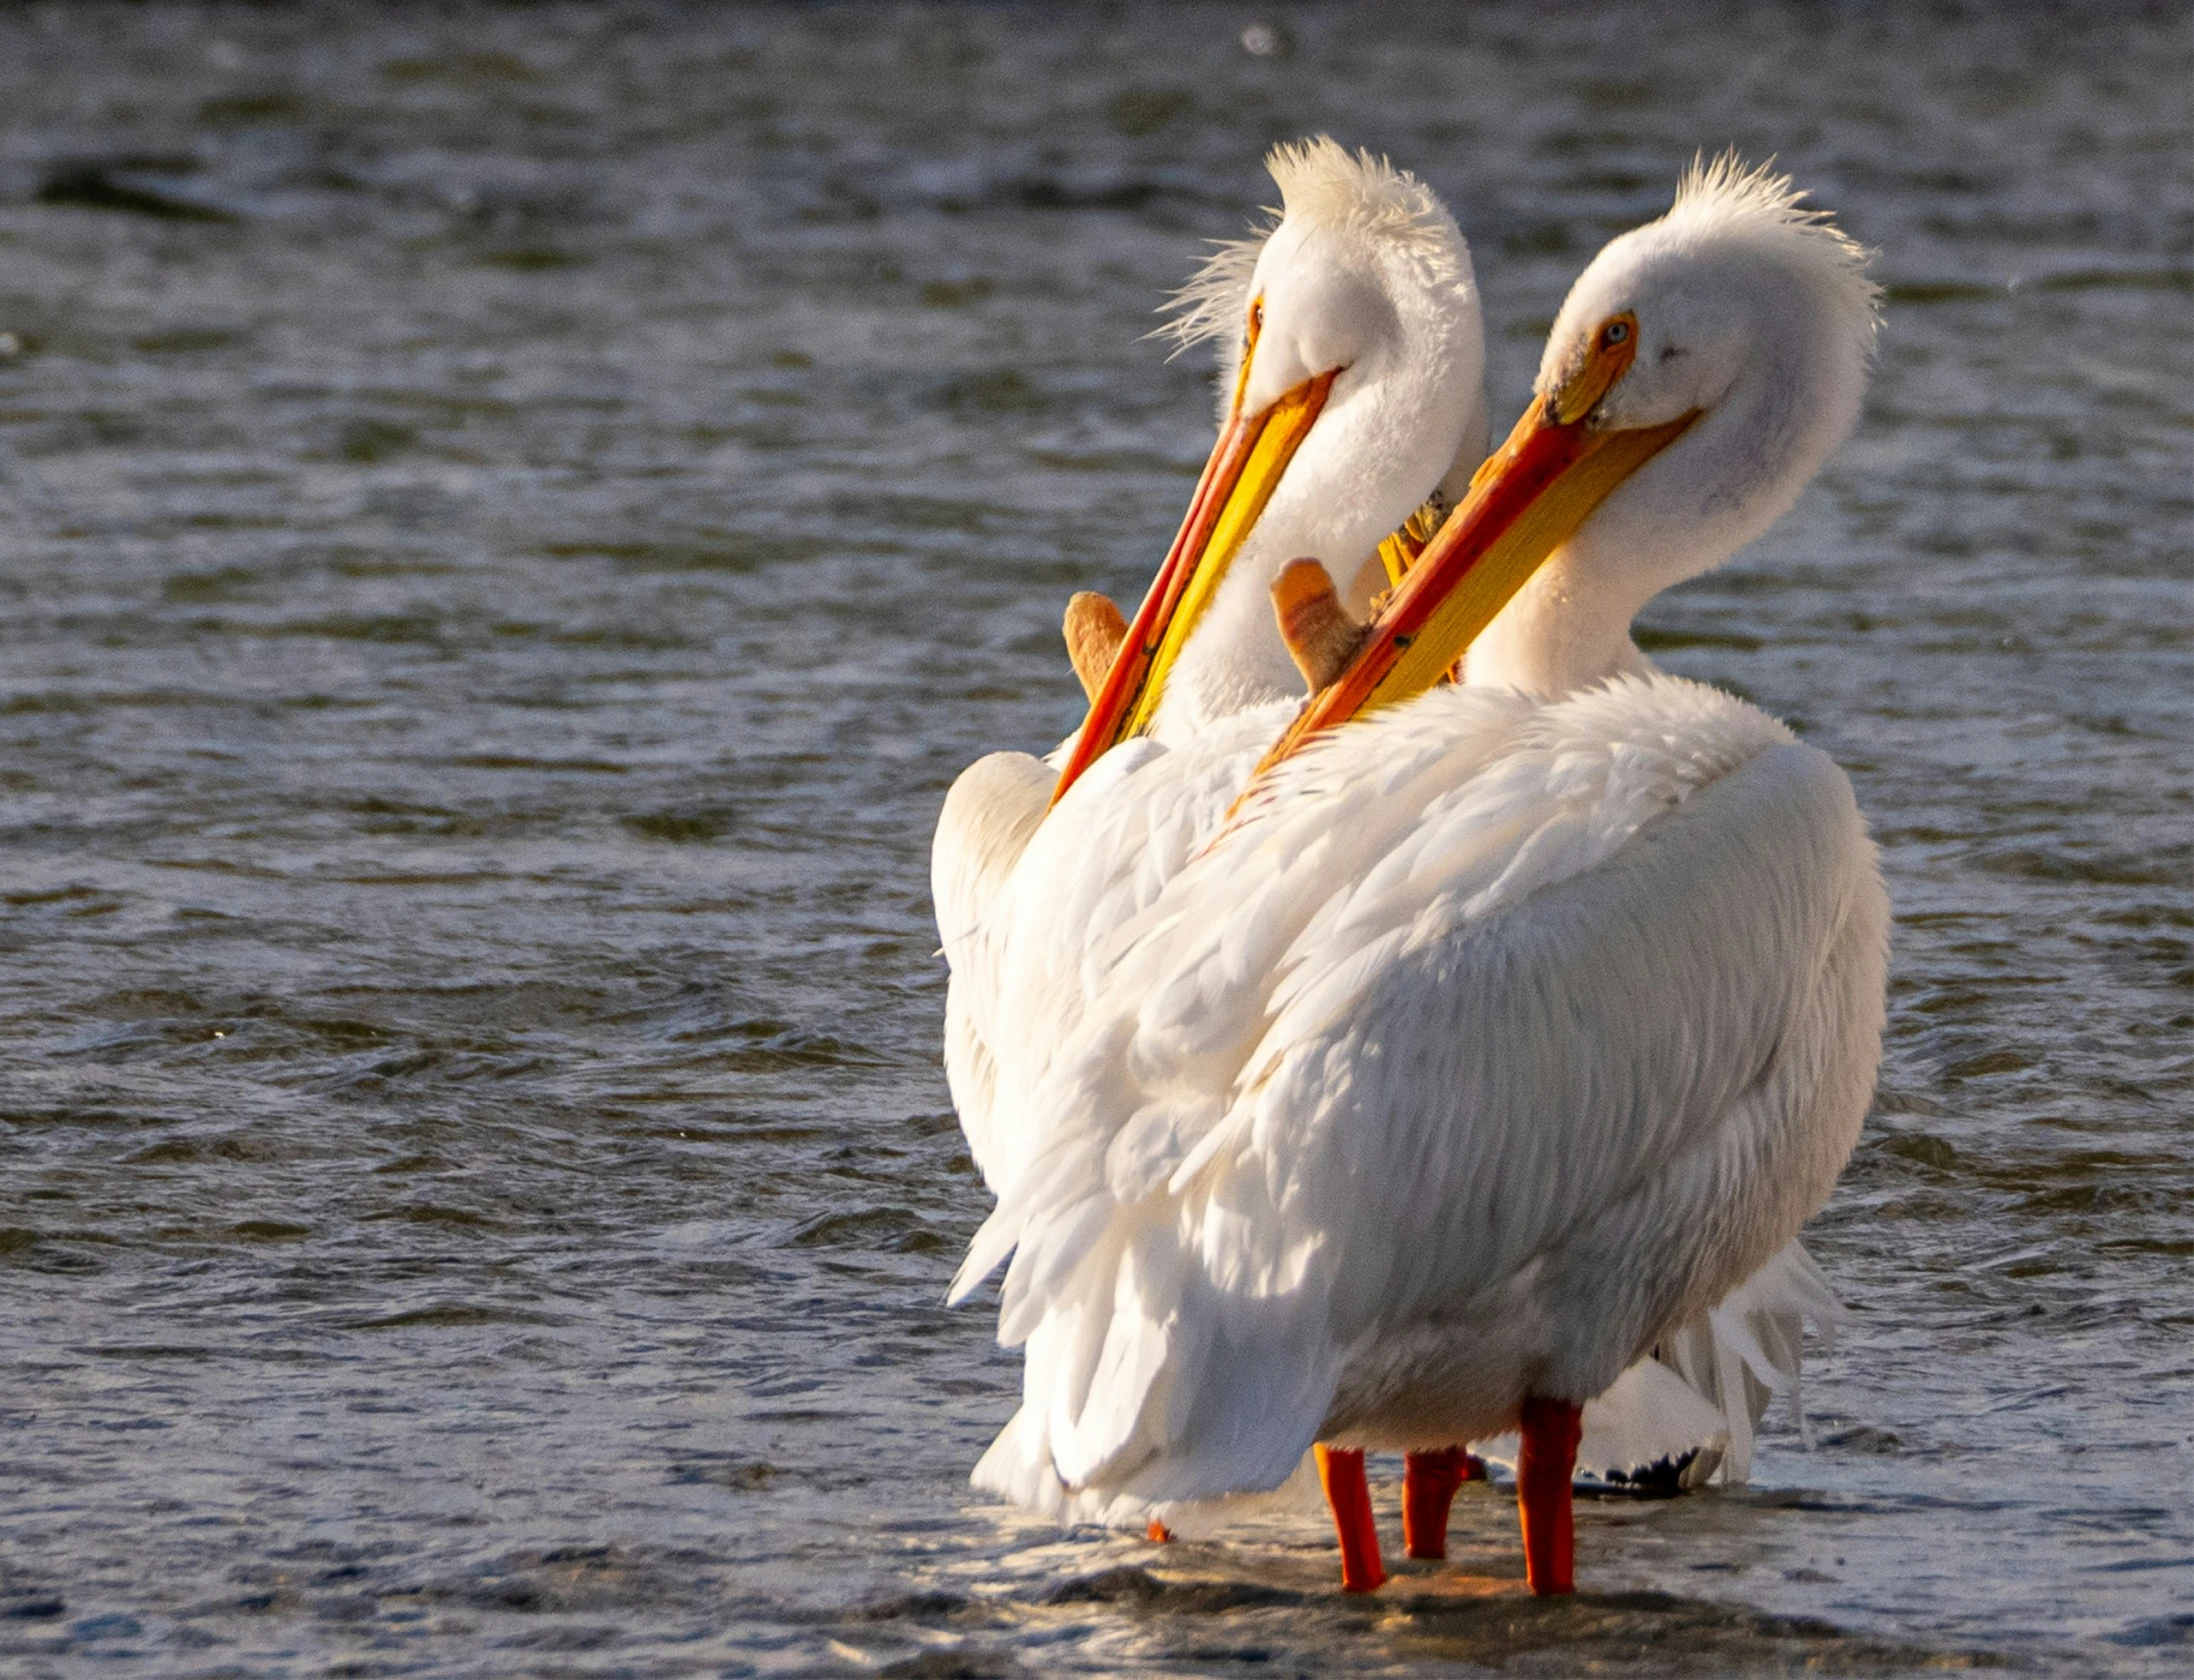 two white pelicans are on the shore with their beaks open